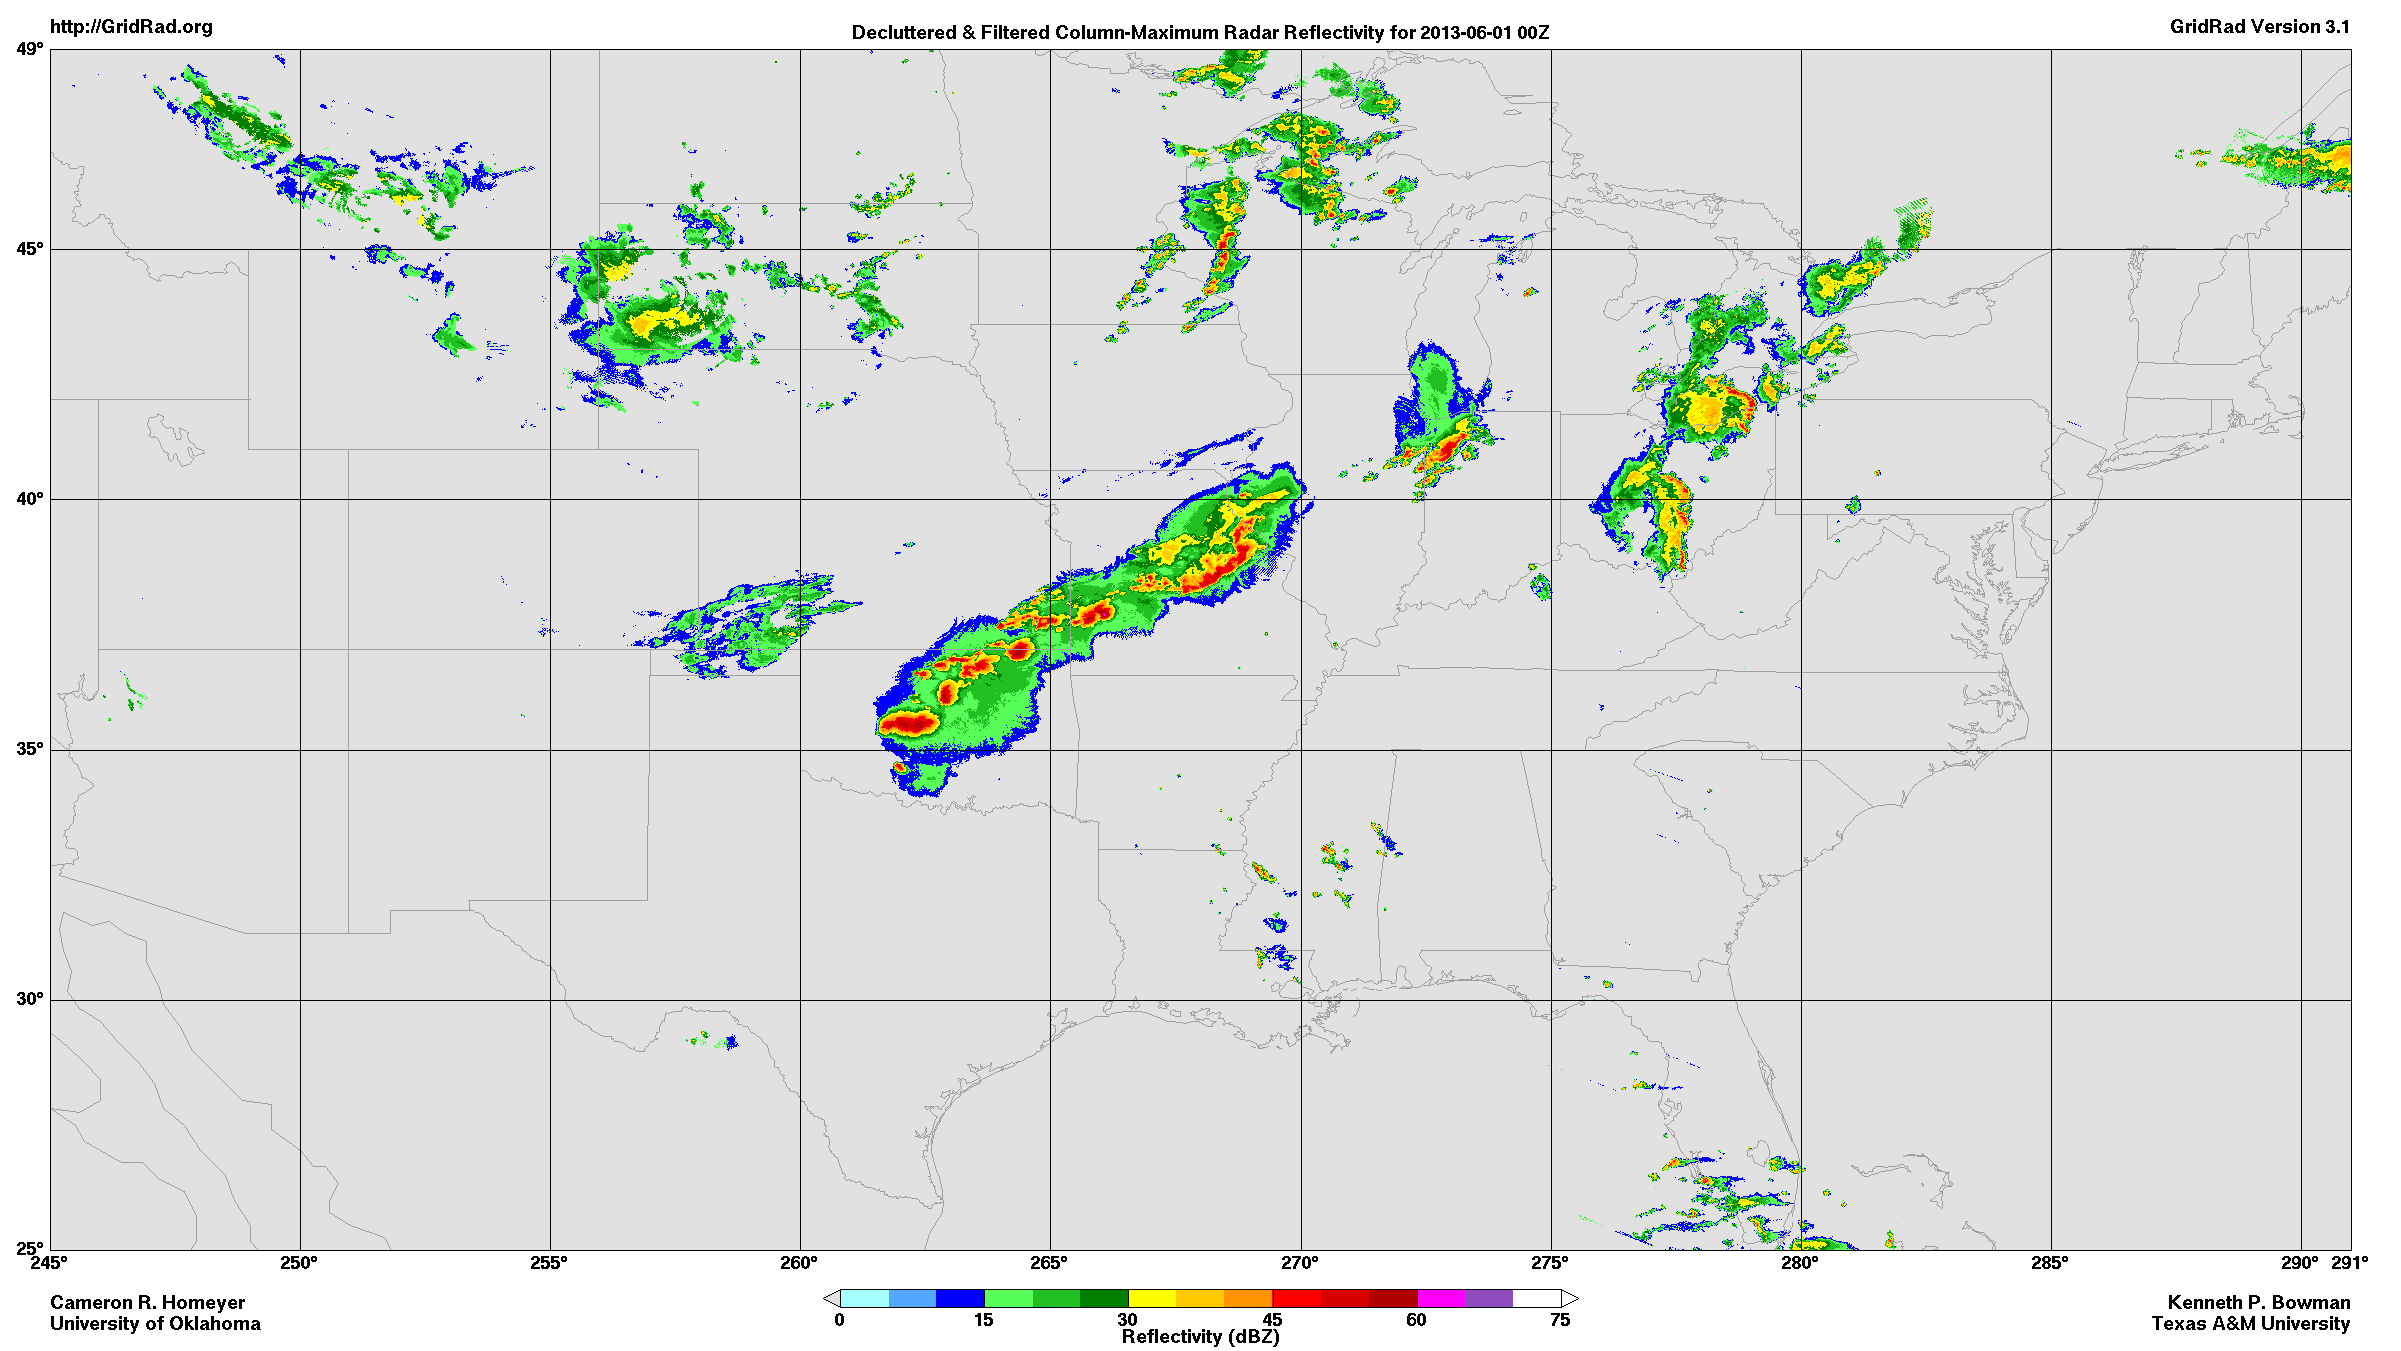 This image is an example of a radar reflectivity map created using GridRad data.